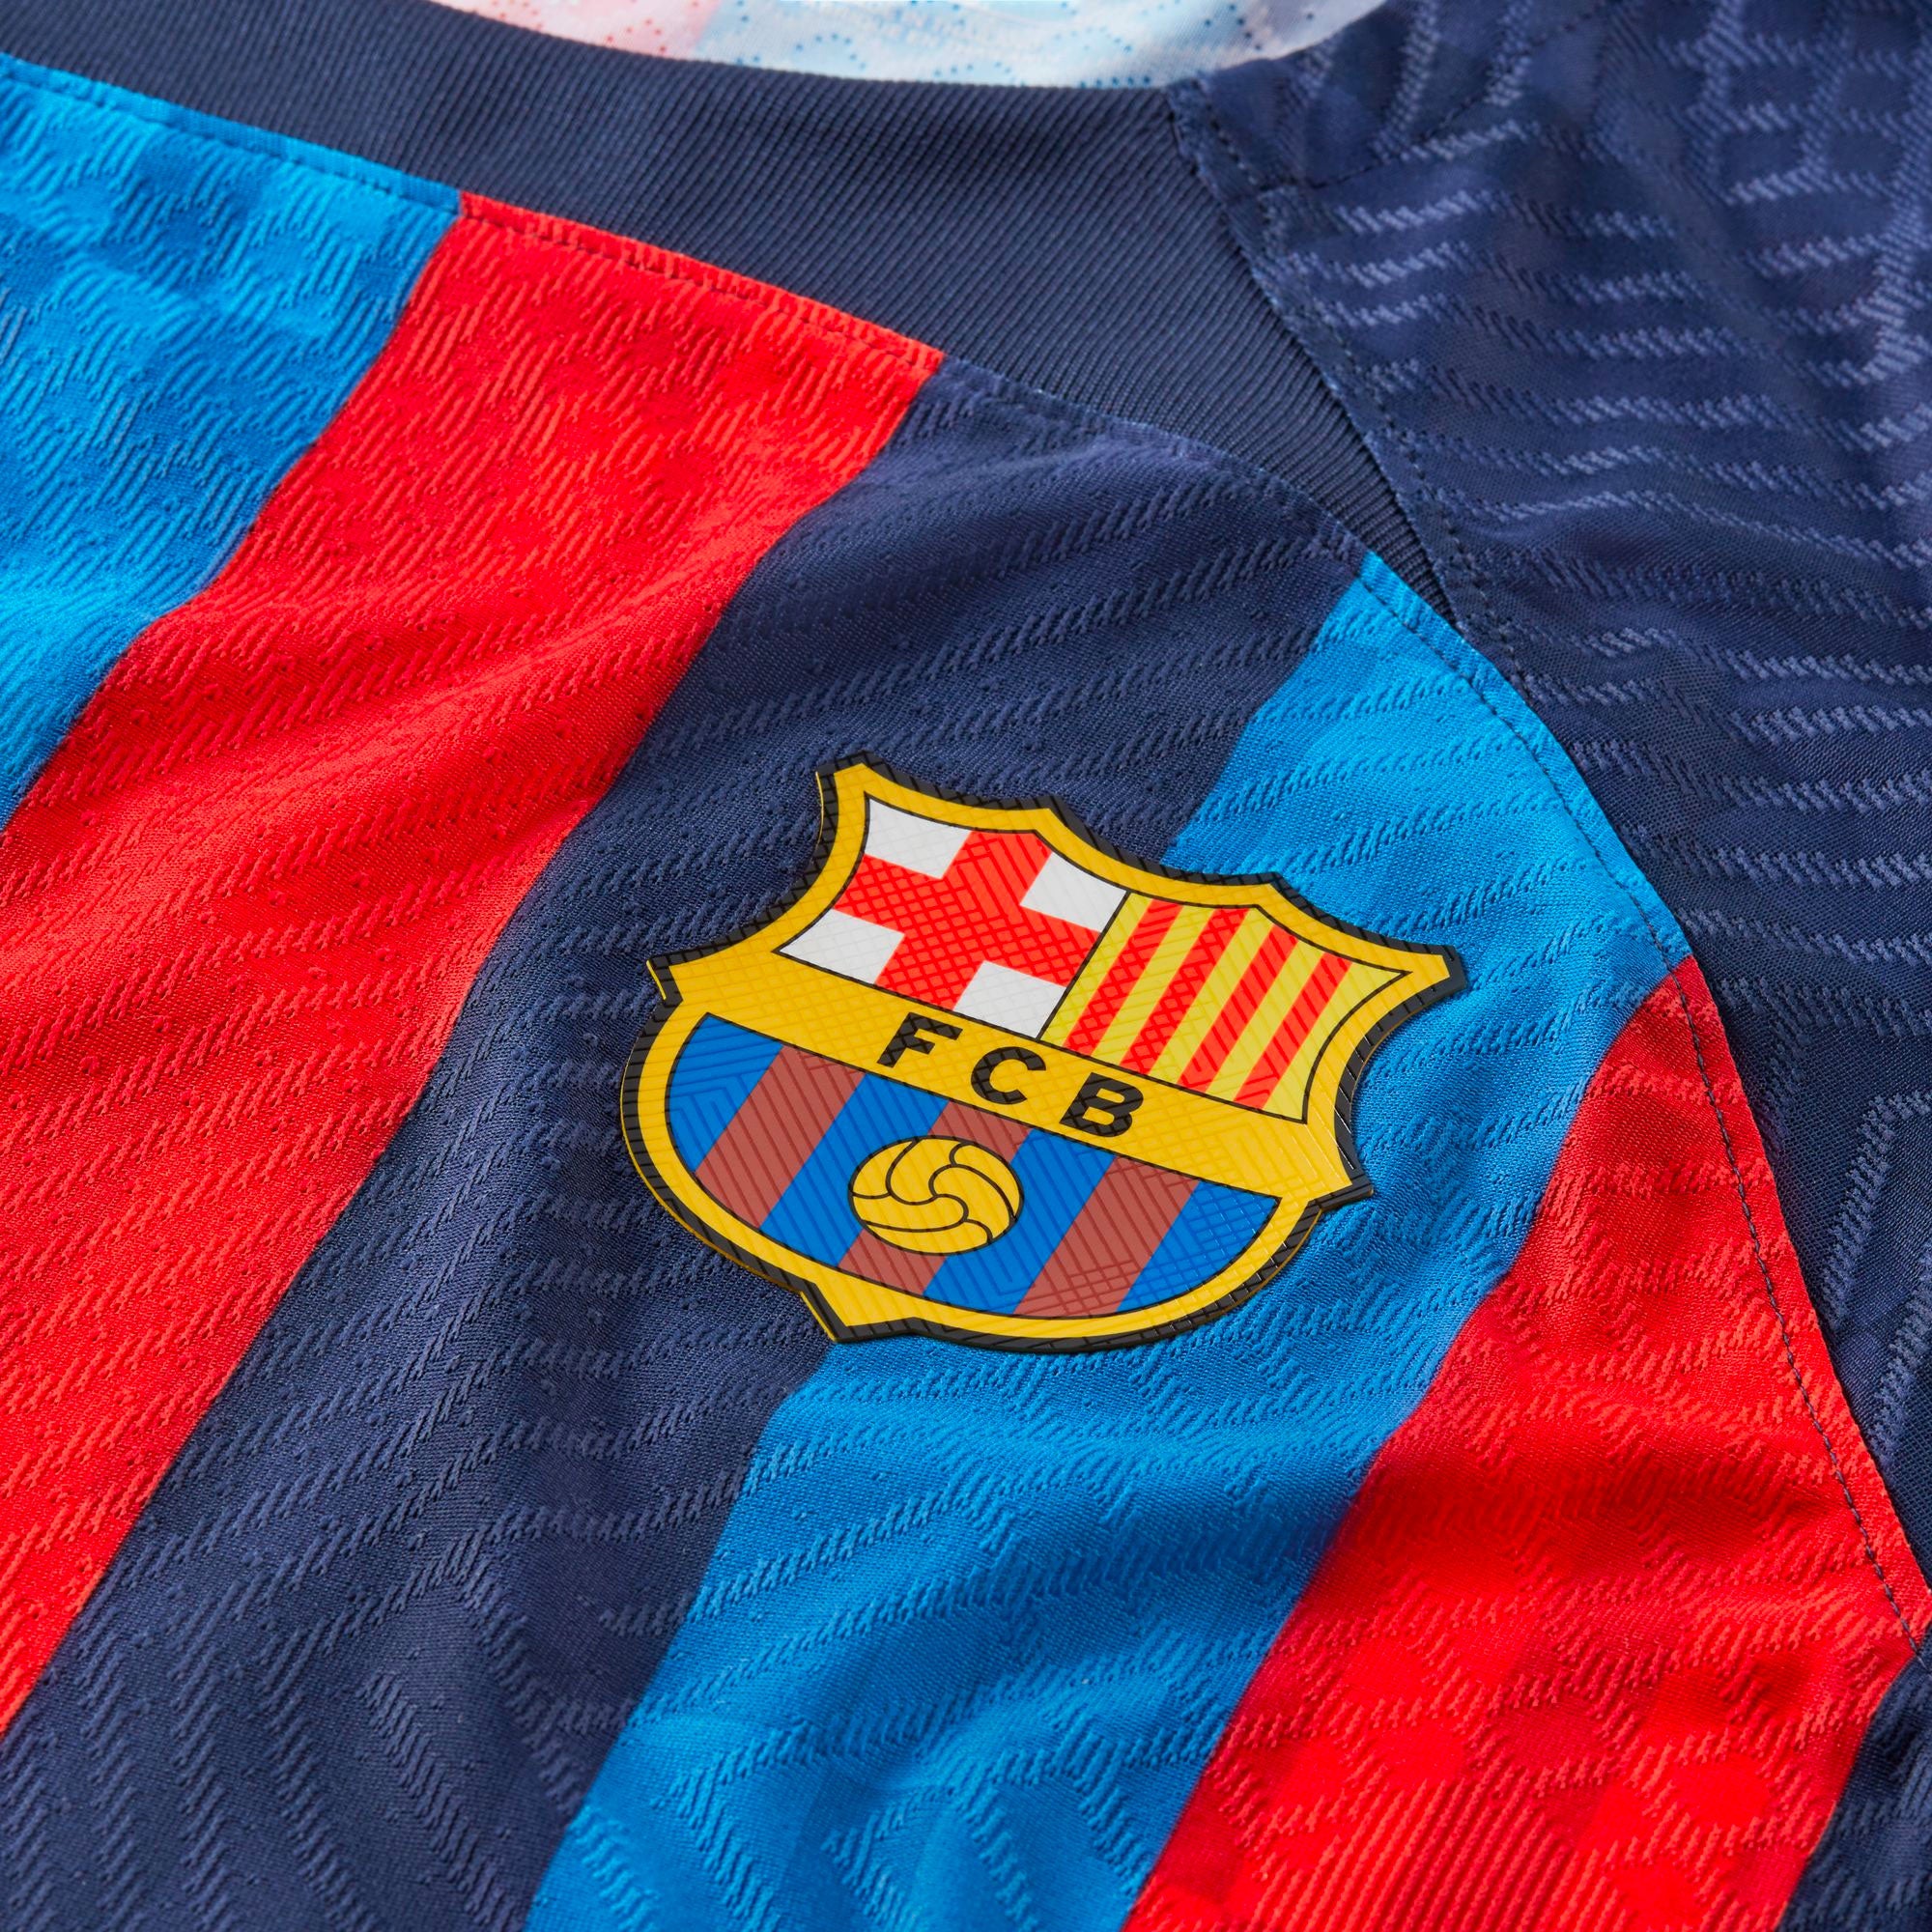 FC Barcelona 2022/23 Home Jersey by Nike